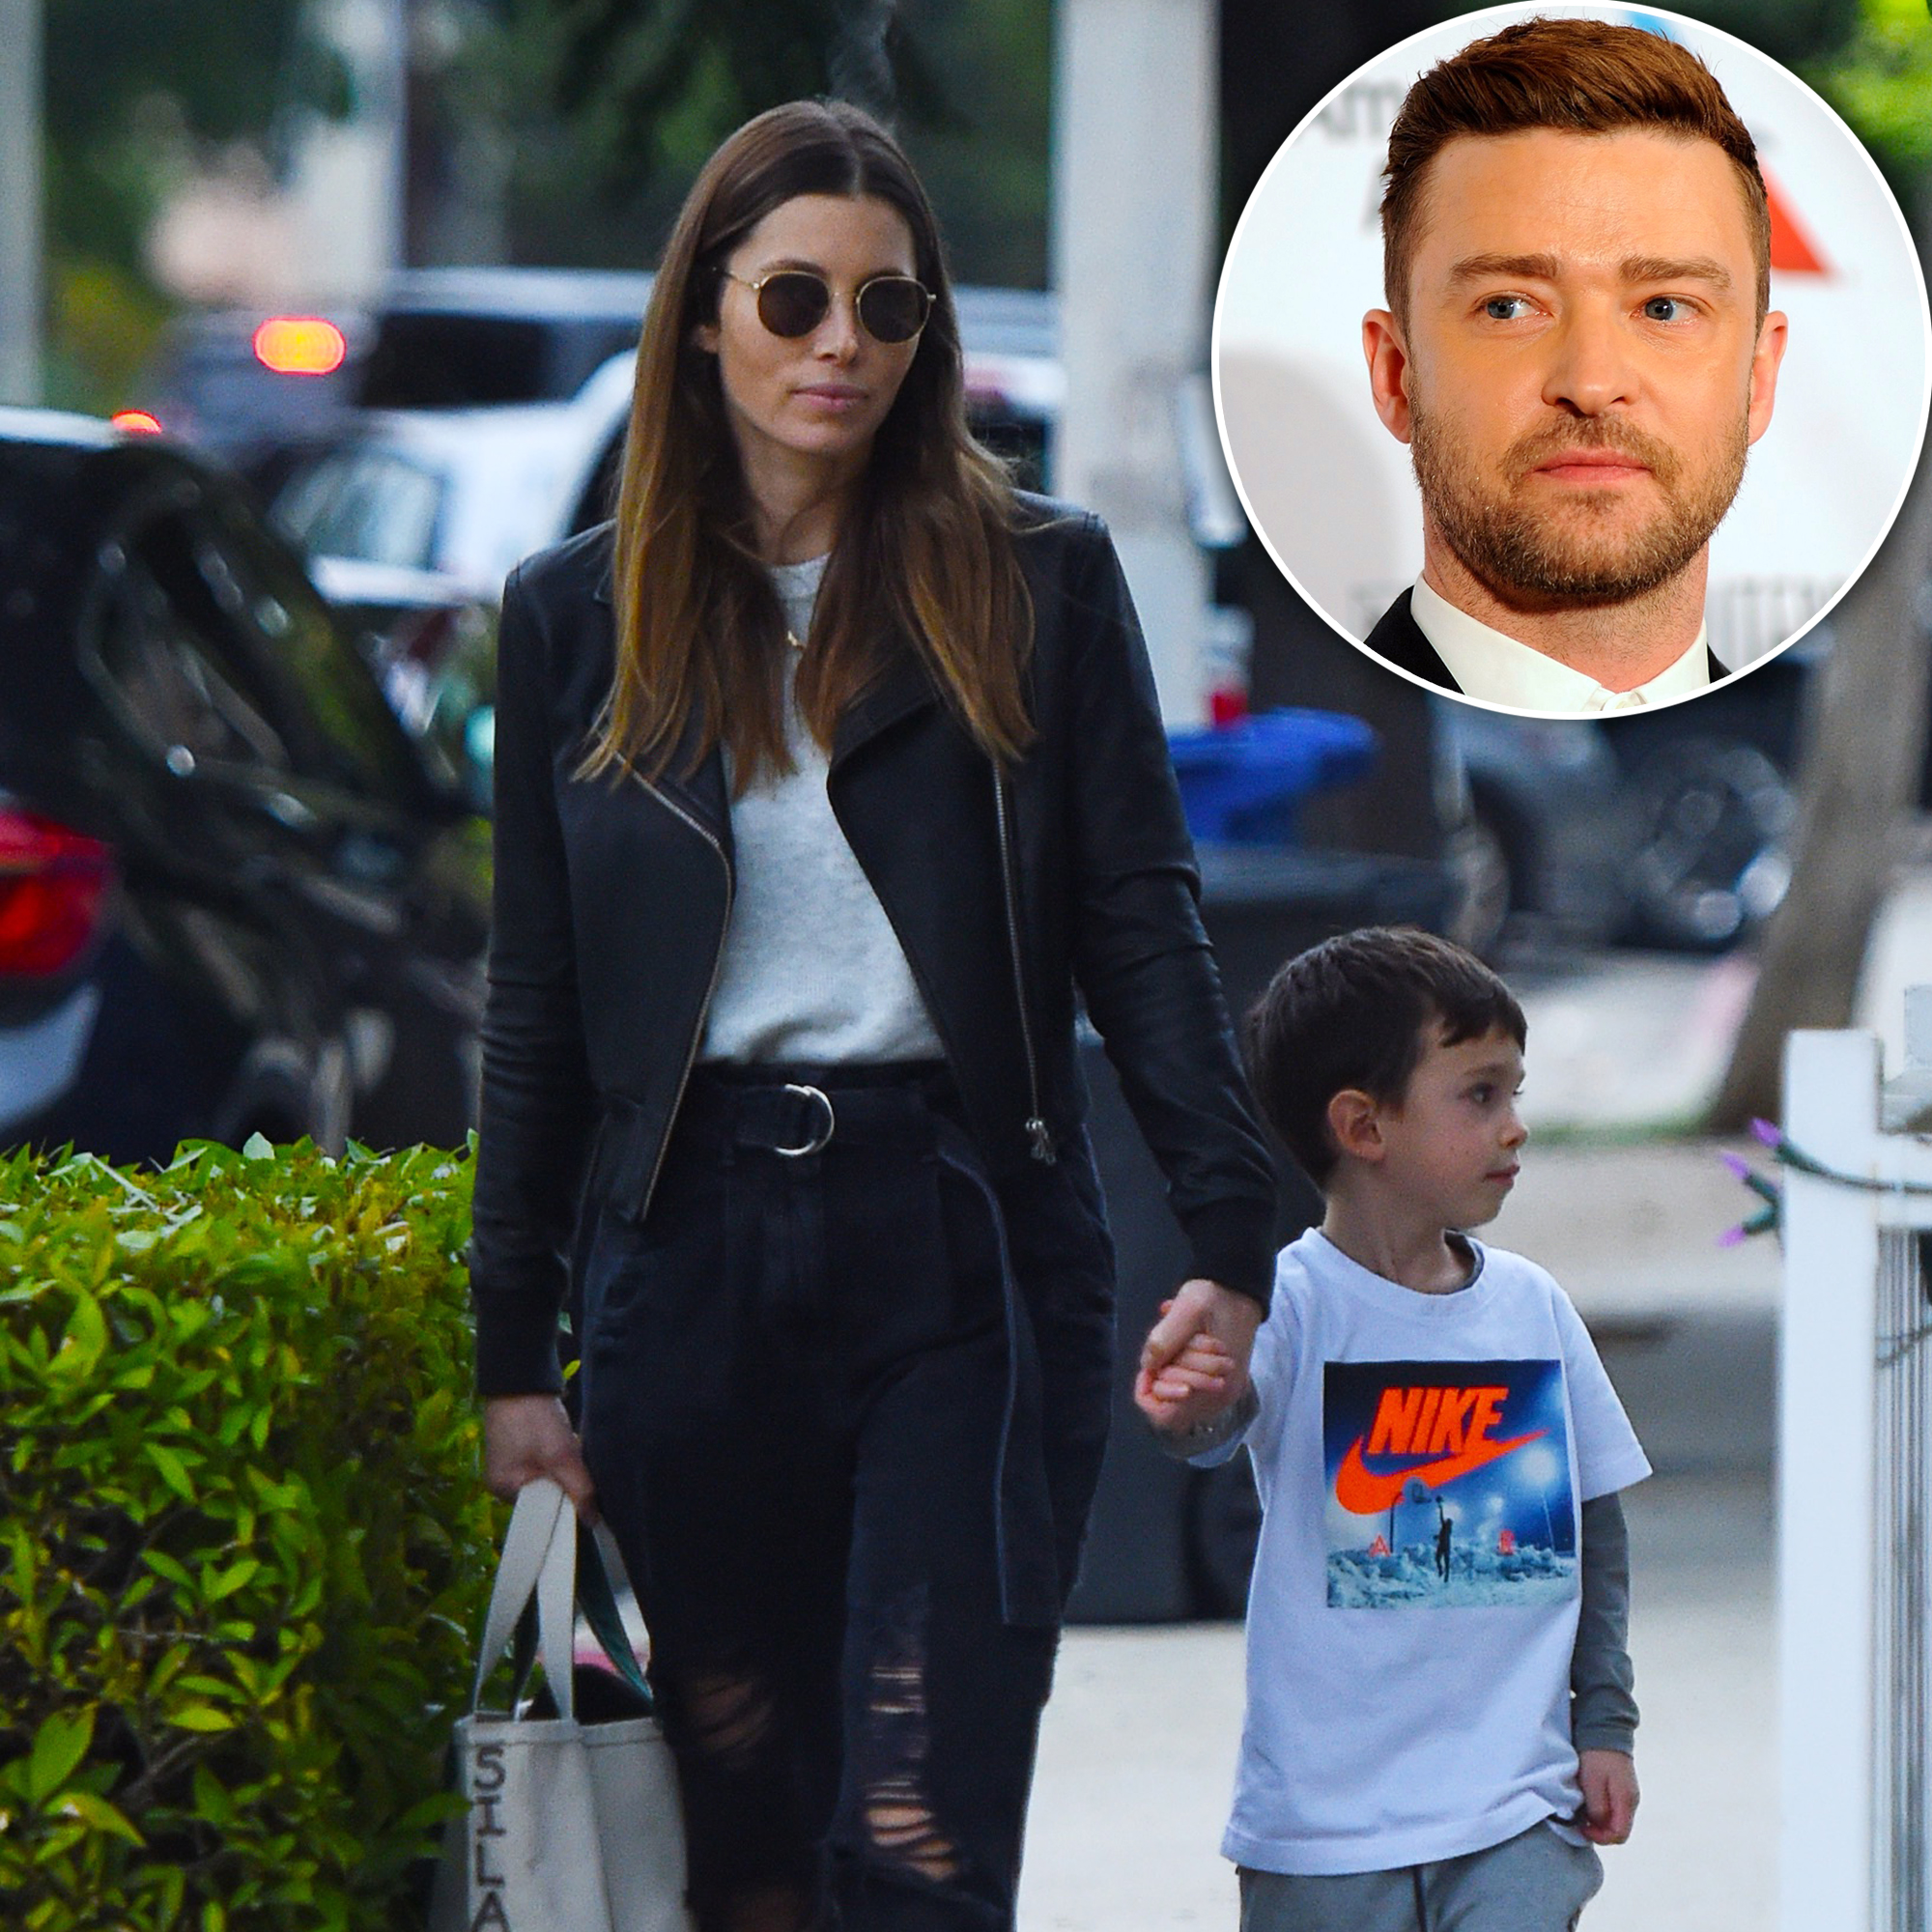 Justin Timberlake is given a run for his money by son Silas on family  outing with Jessica Biel in LA